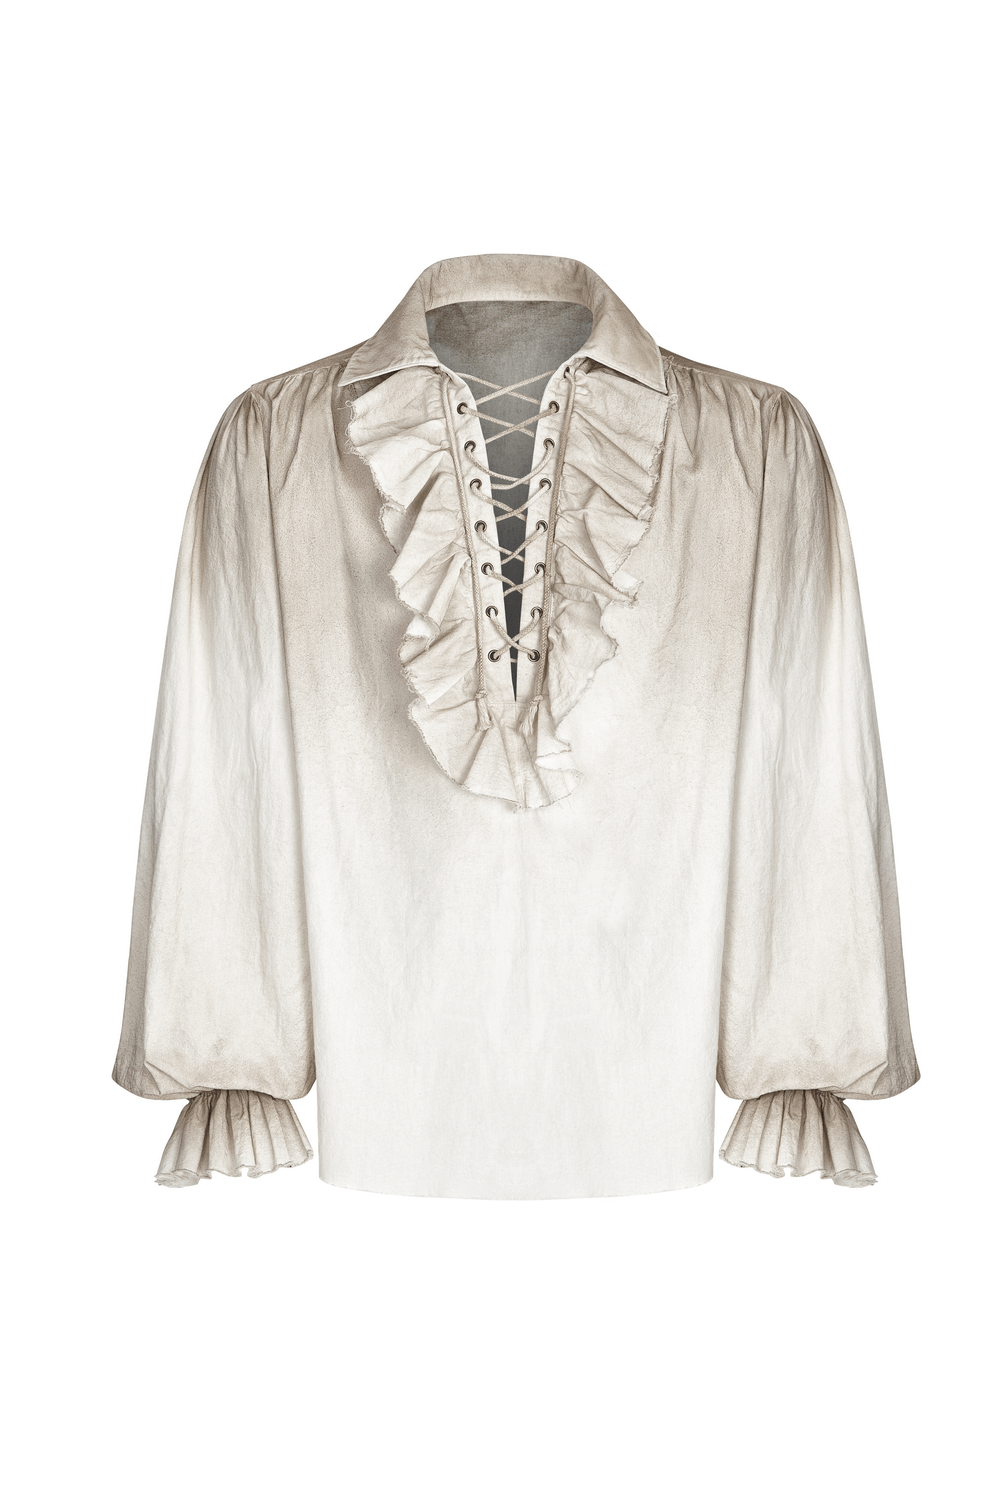 Vintage Linen Pirate Shirt with Eyelet Lace-up Front - HARD'N'HEAVY